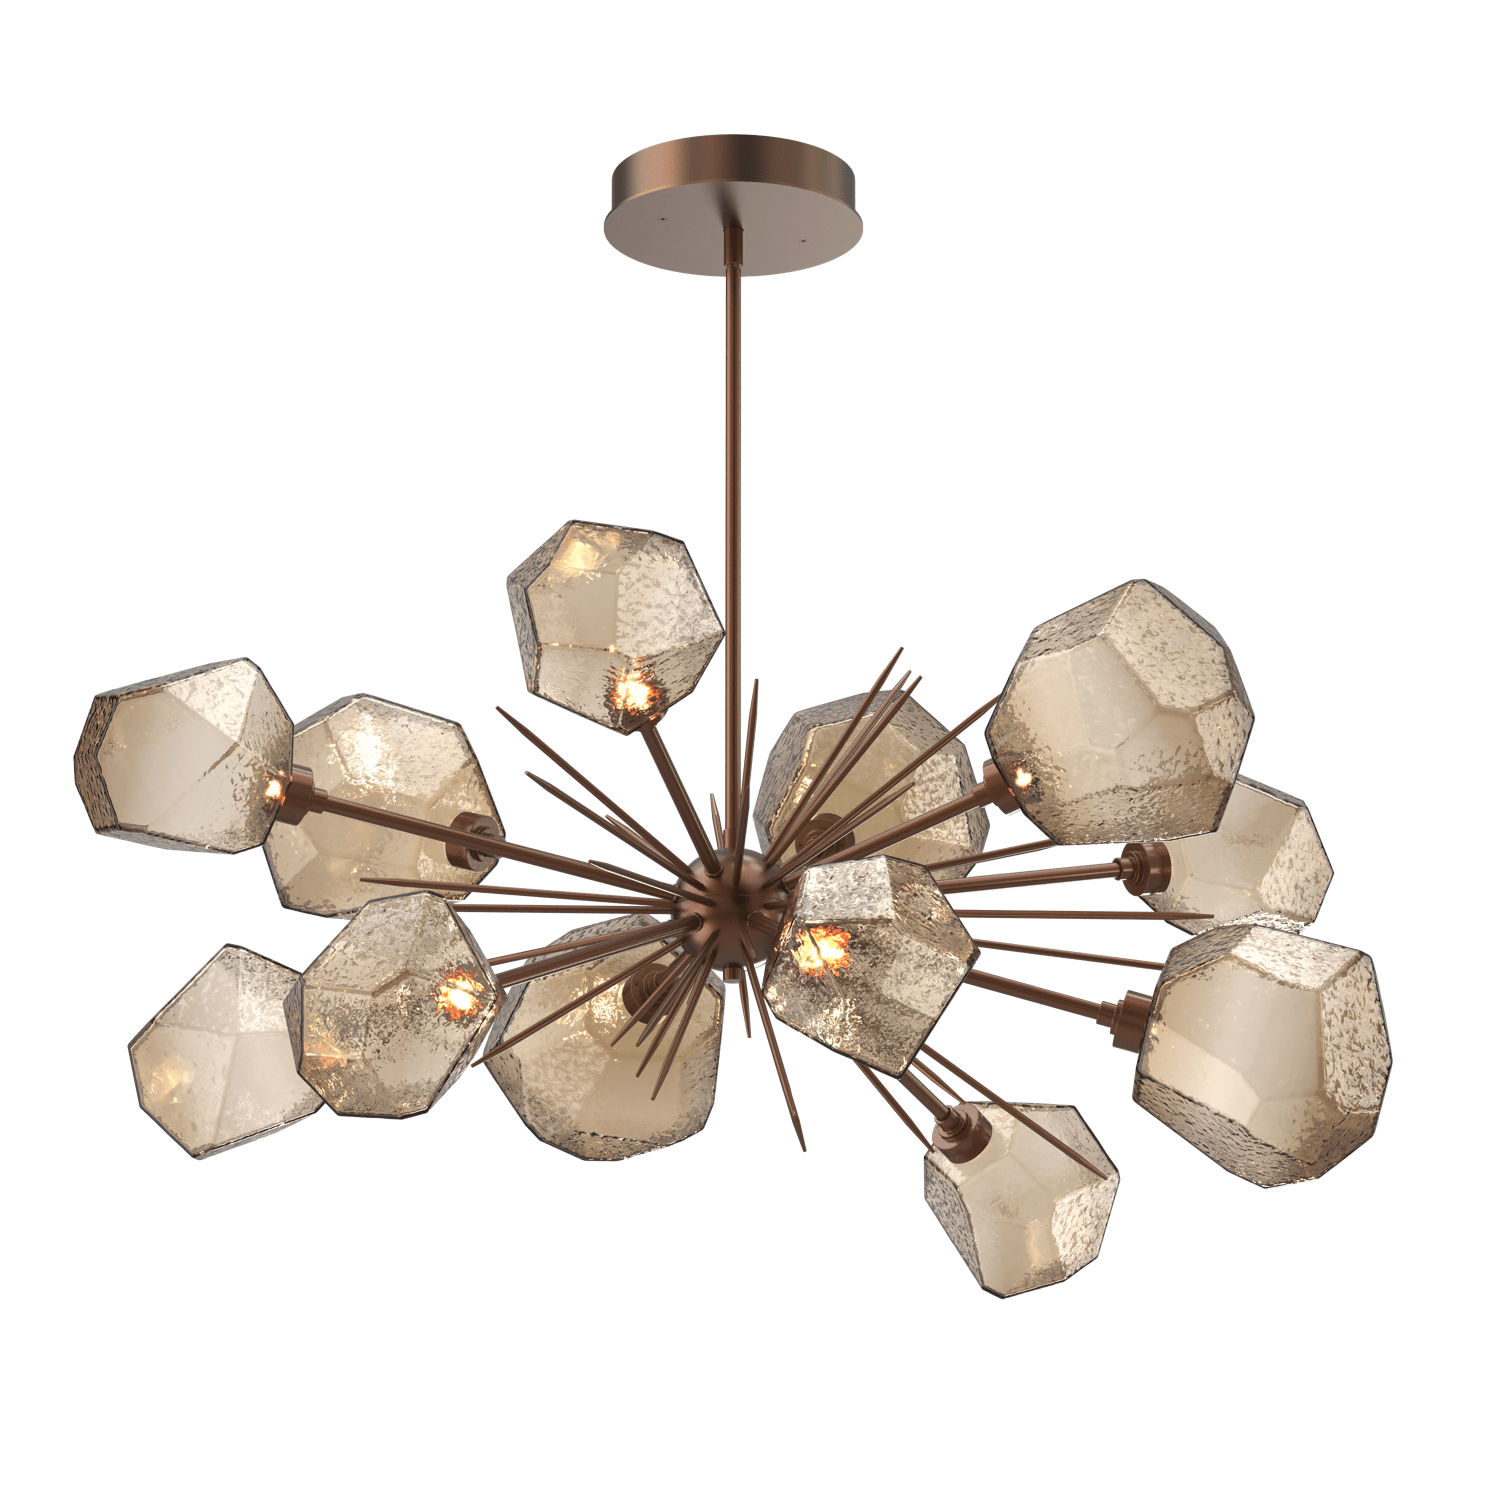 PLB0039-0D-BB-B-Hammerton-Studio-Gem-43-inch-oval-starburst-chandelier-with-burnished-bronze-finish-and-bronze-blown-glass-shades-and-LED-lamping